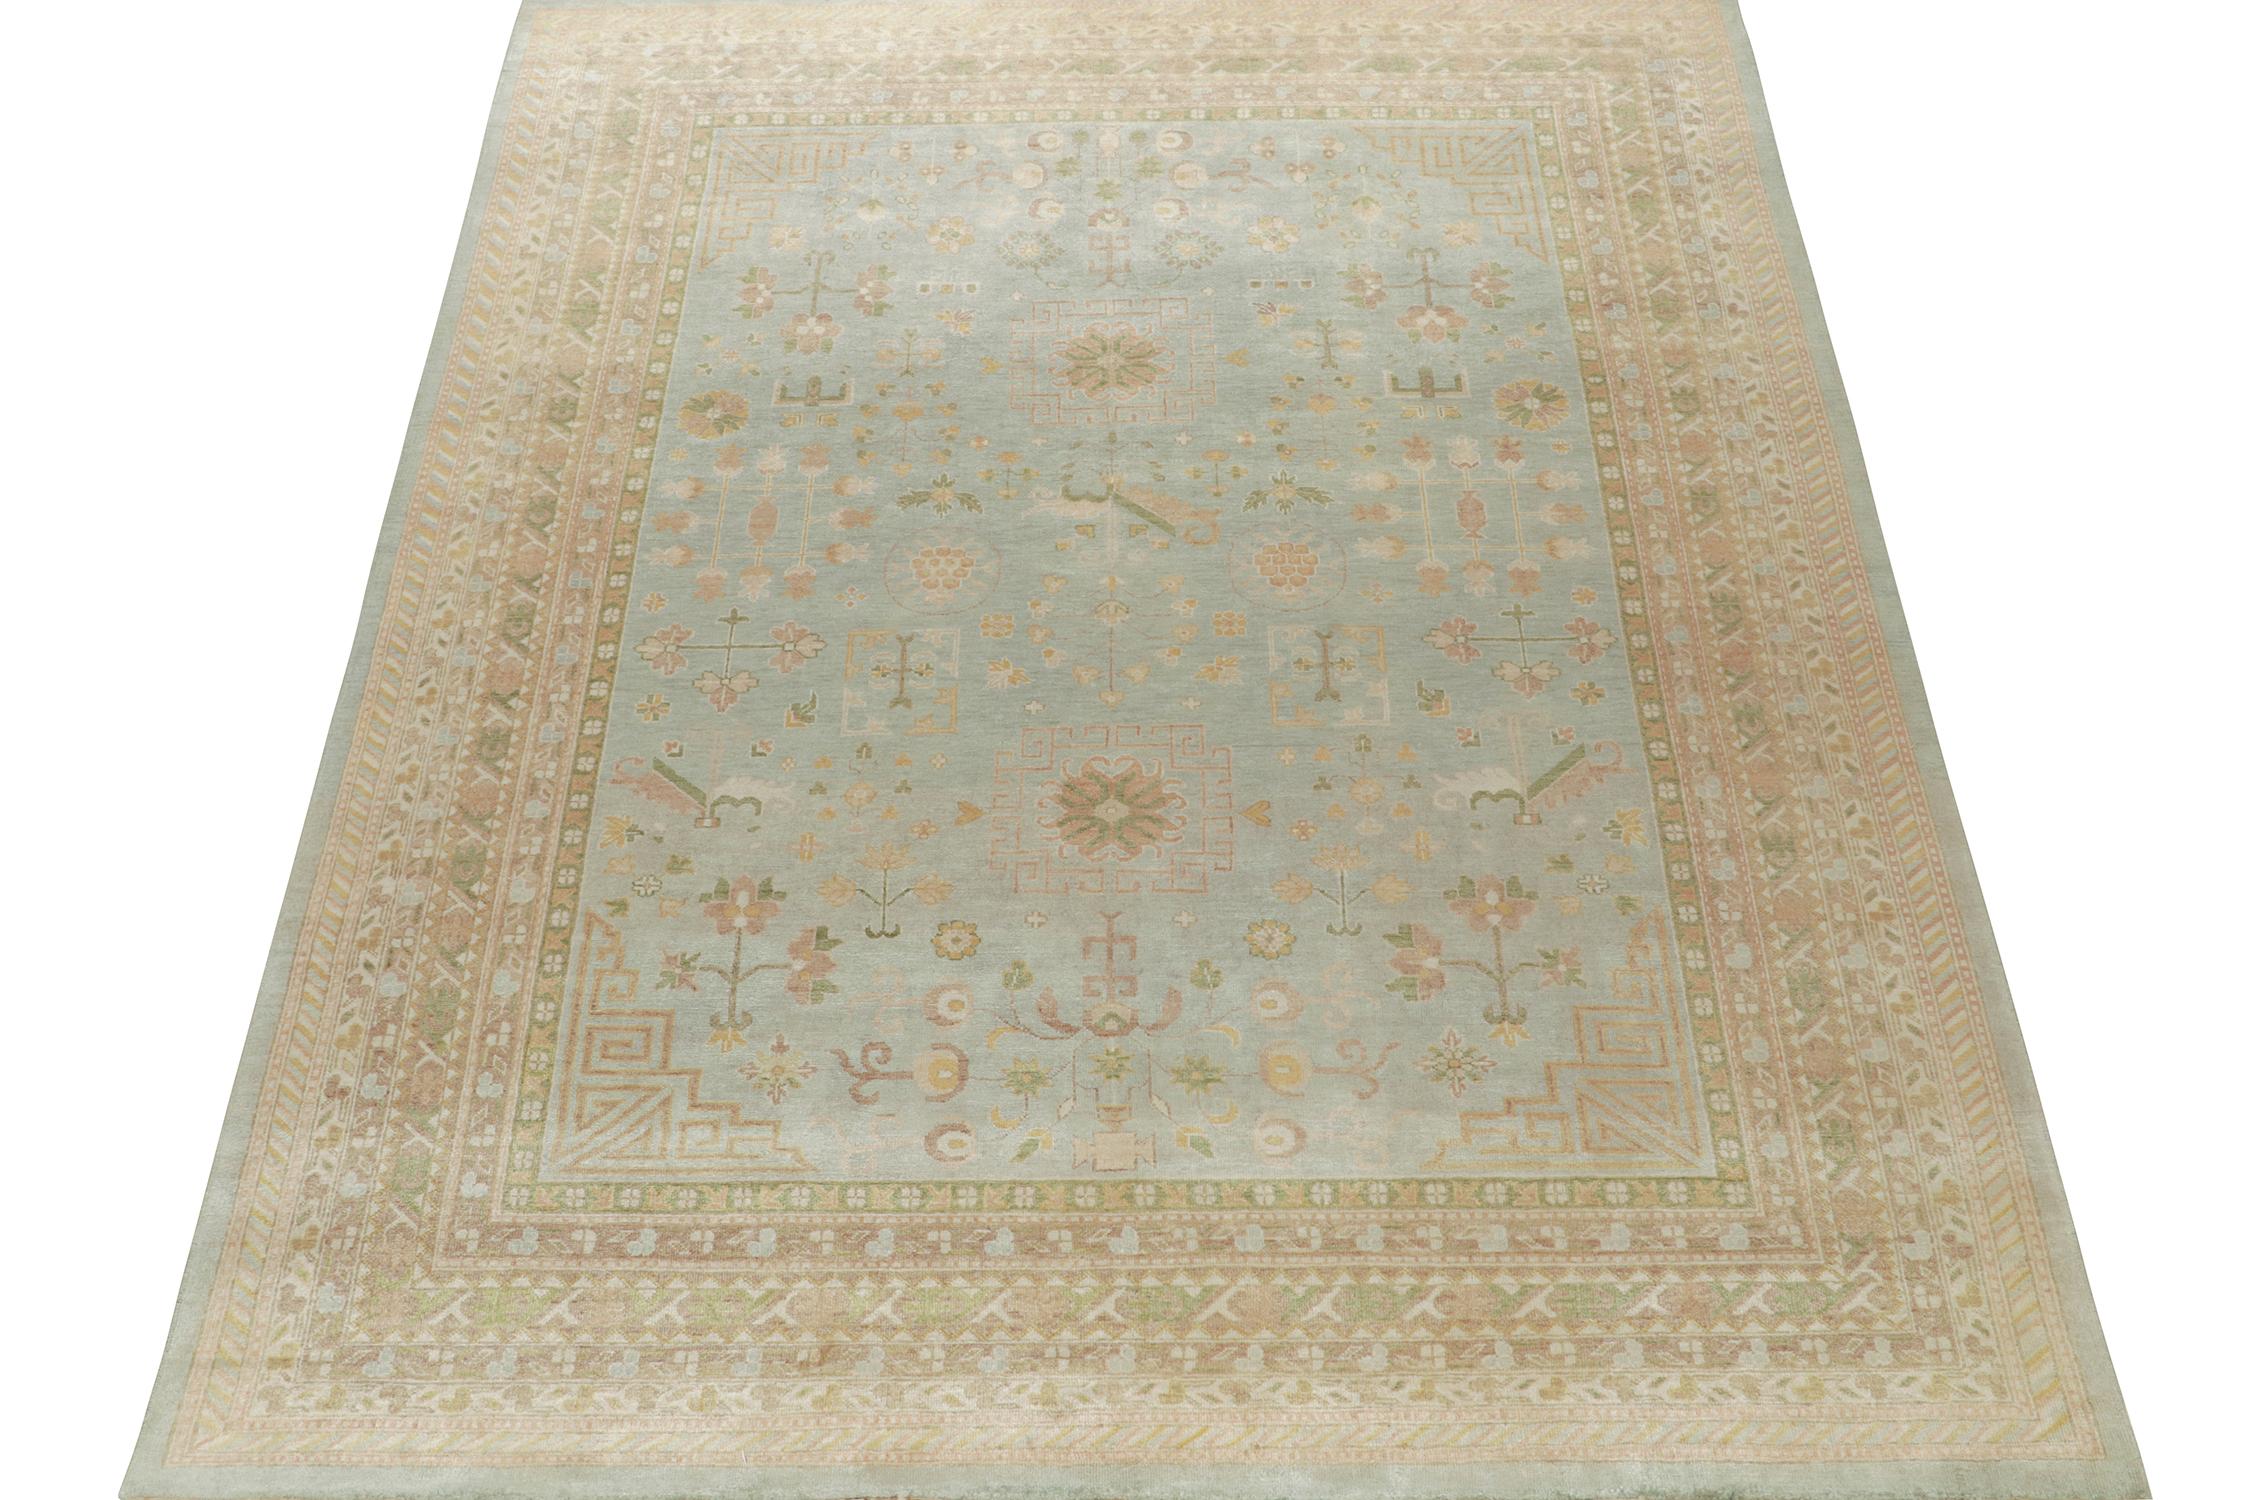 Indian Rug & Kilim’s Khotan Style Rug with Blue, Gold and Green Floral Pattern For Sale